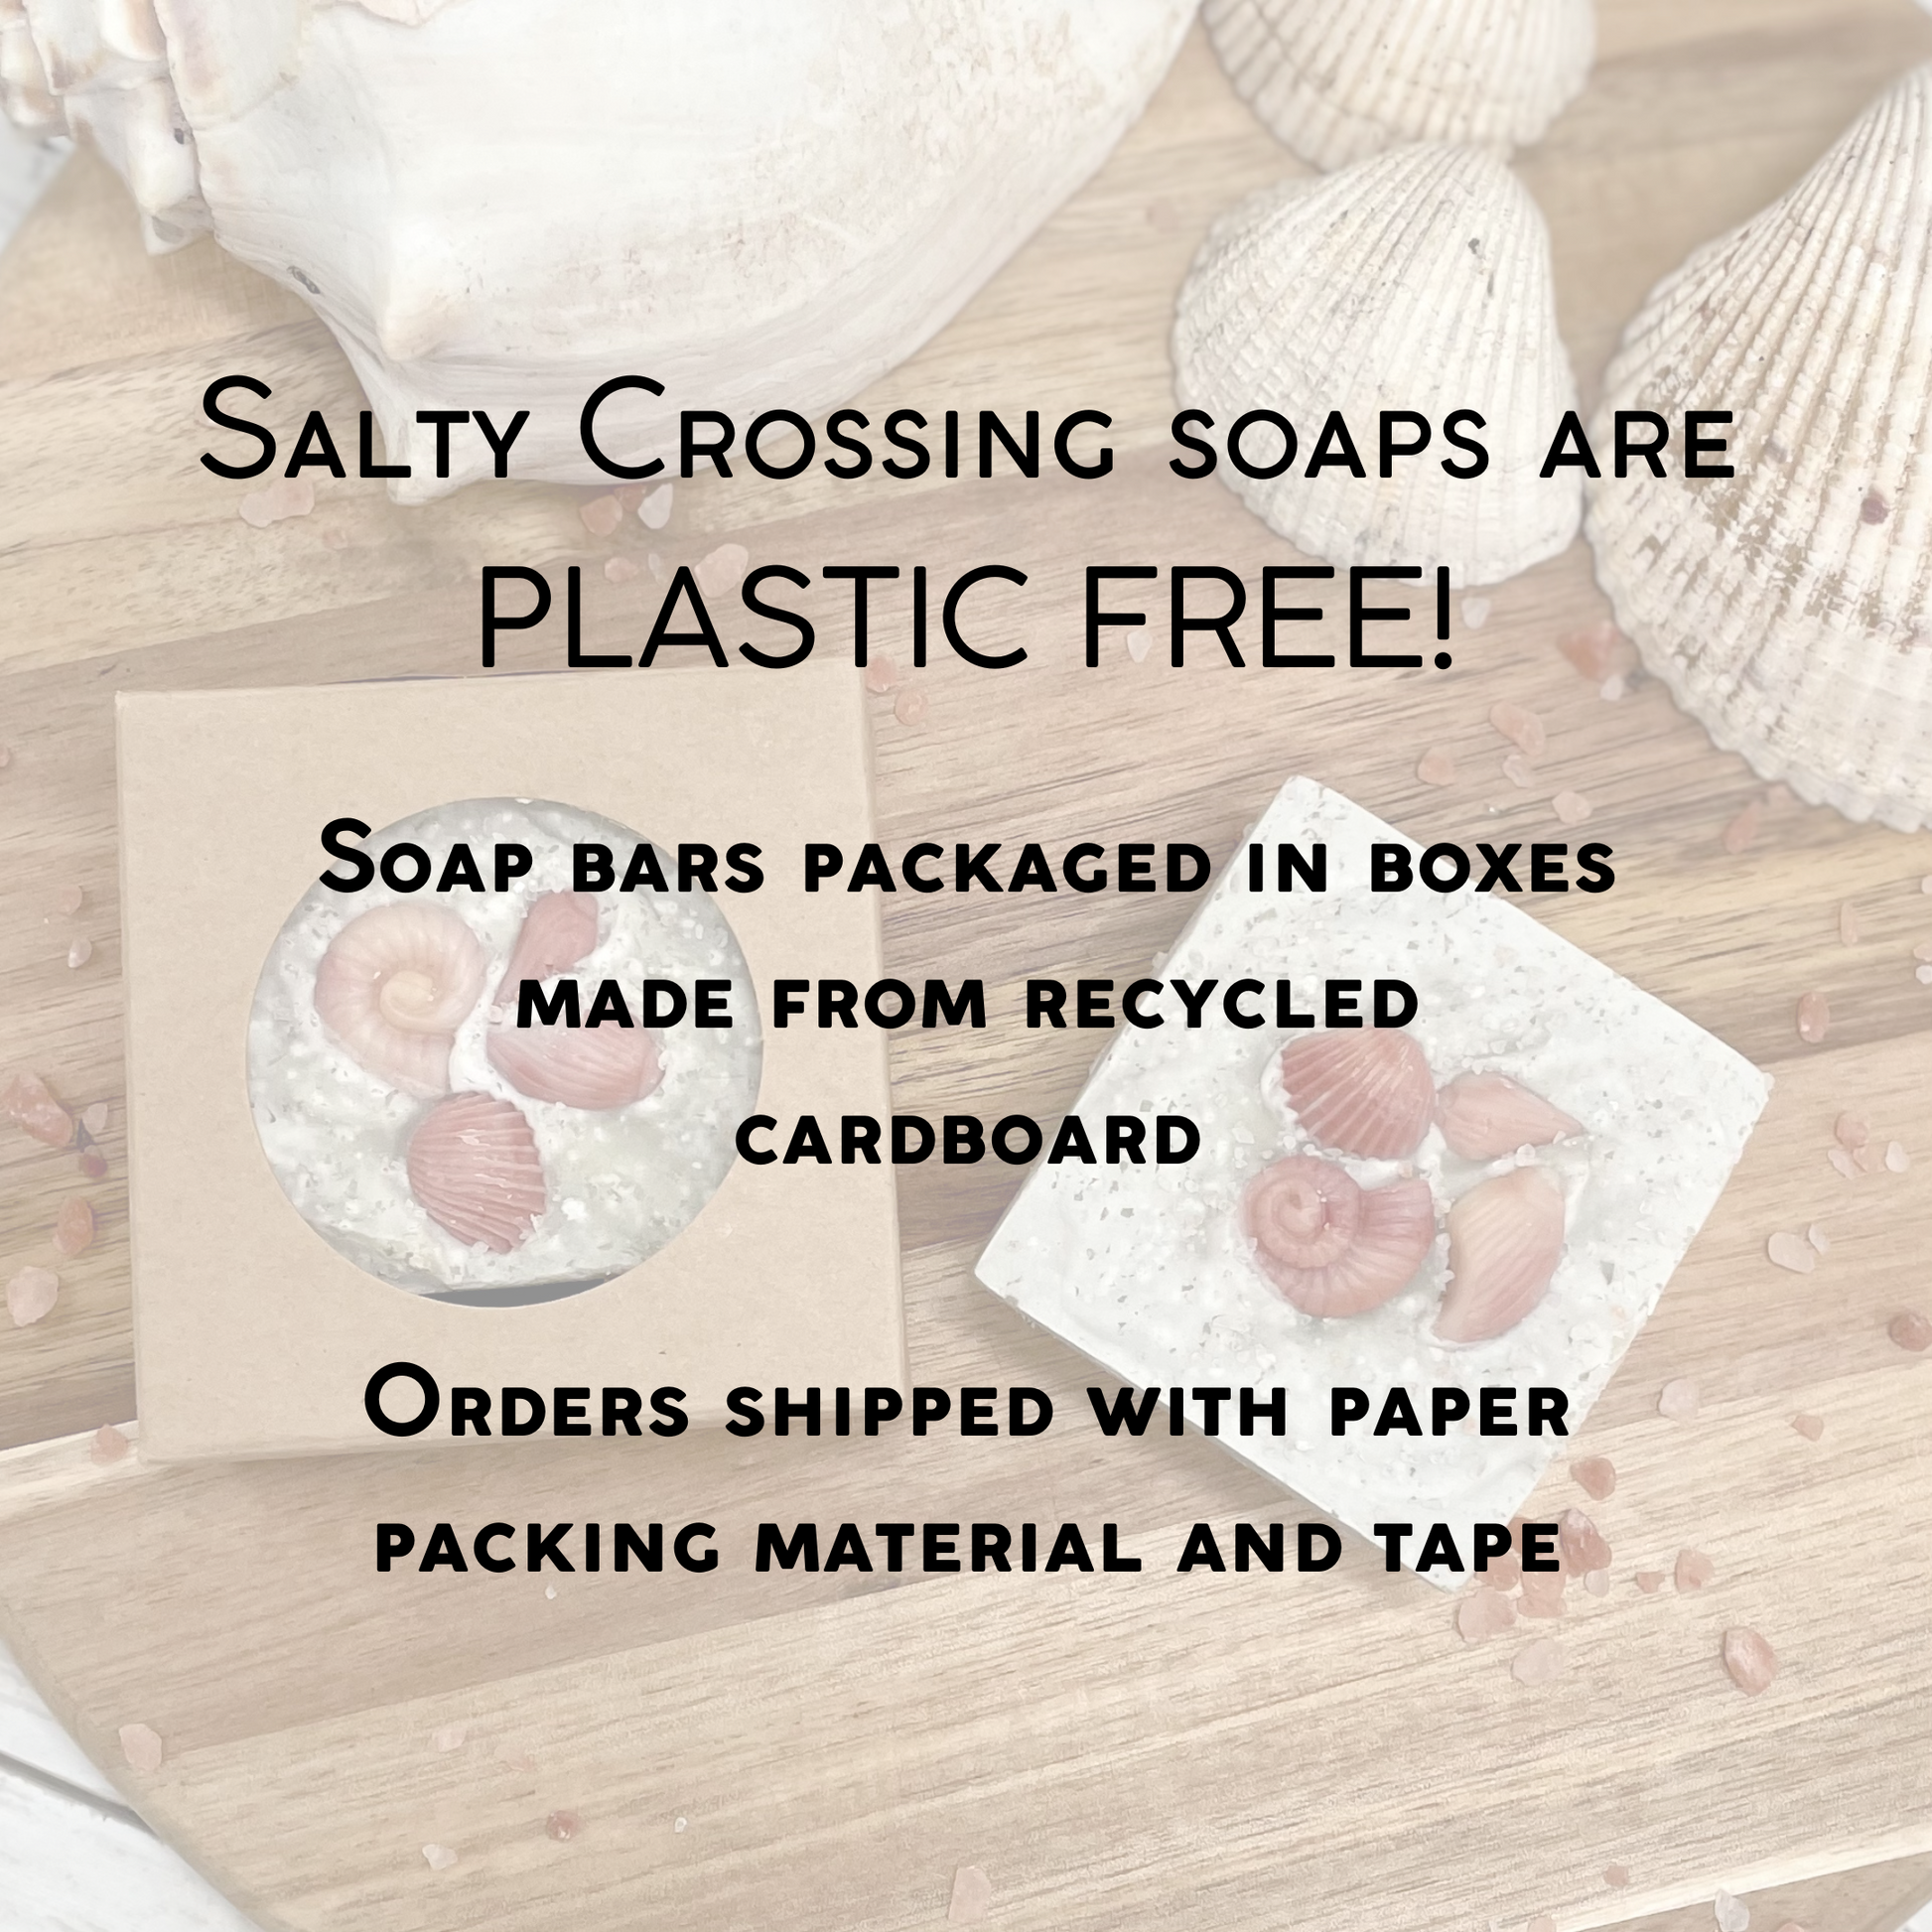 graphic. Salty Crossing soaps are plastic free. soap bars are packaged in boxes made from recycled cardboard. orders are shipped with paper packing material and tape.